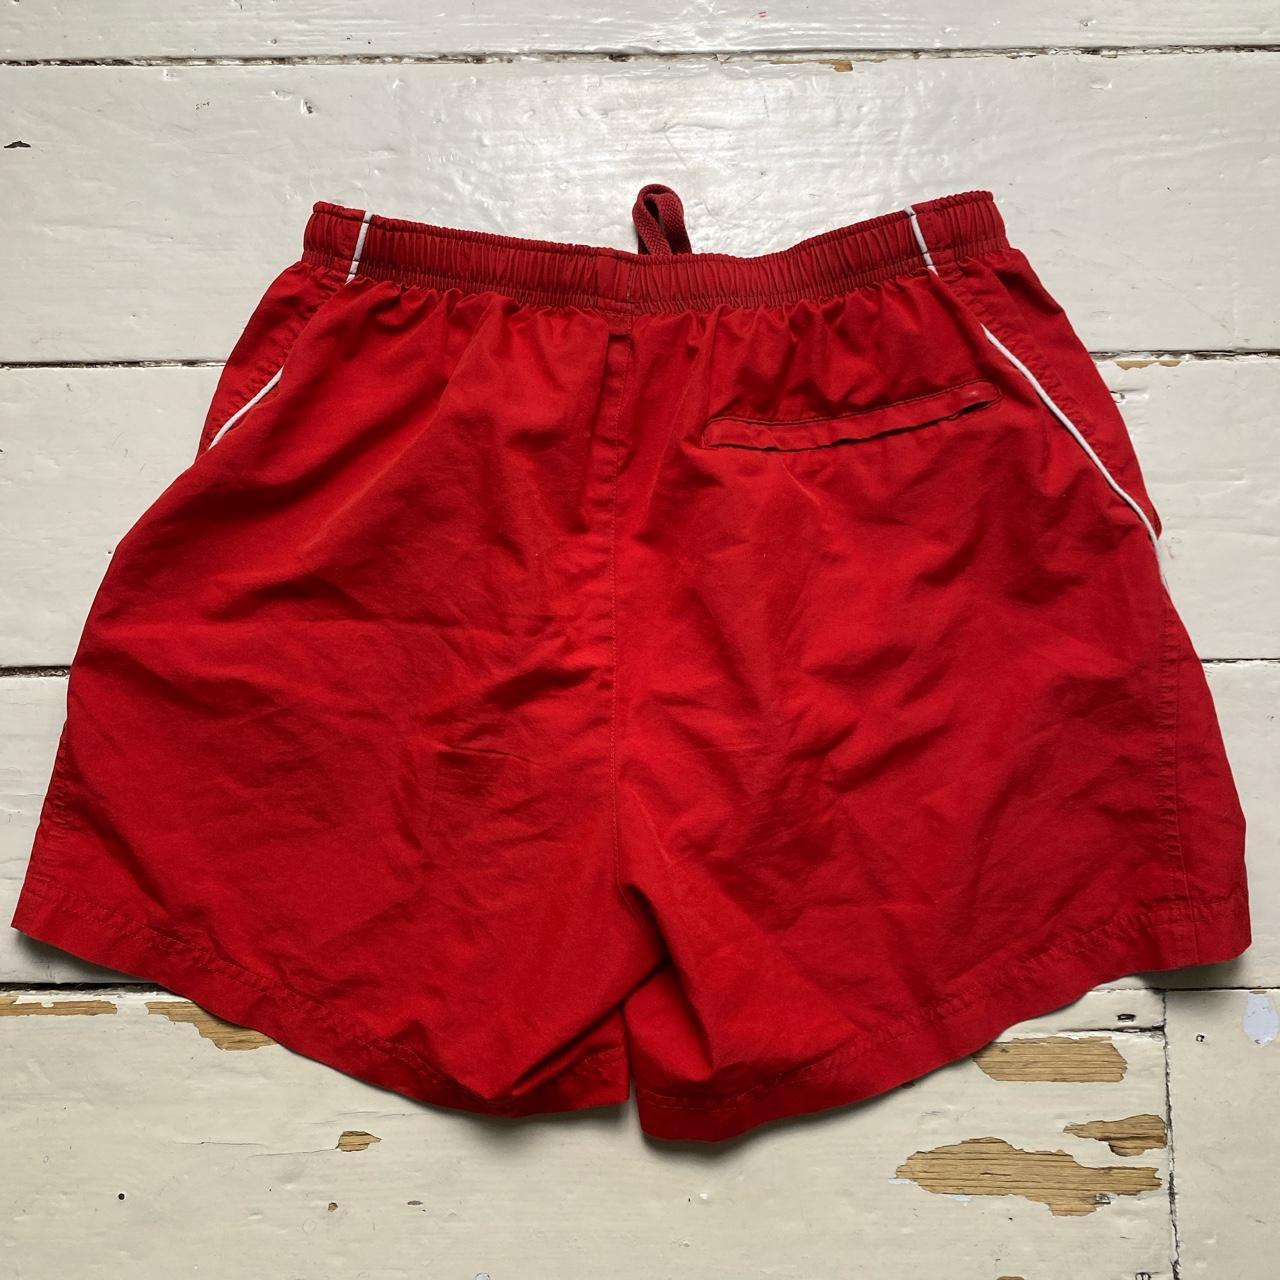 Nike Vintage Swoosh Red and White Shell Track Pant Shorts